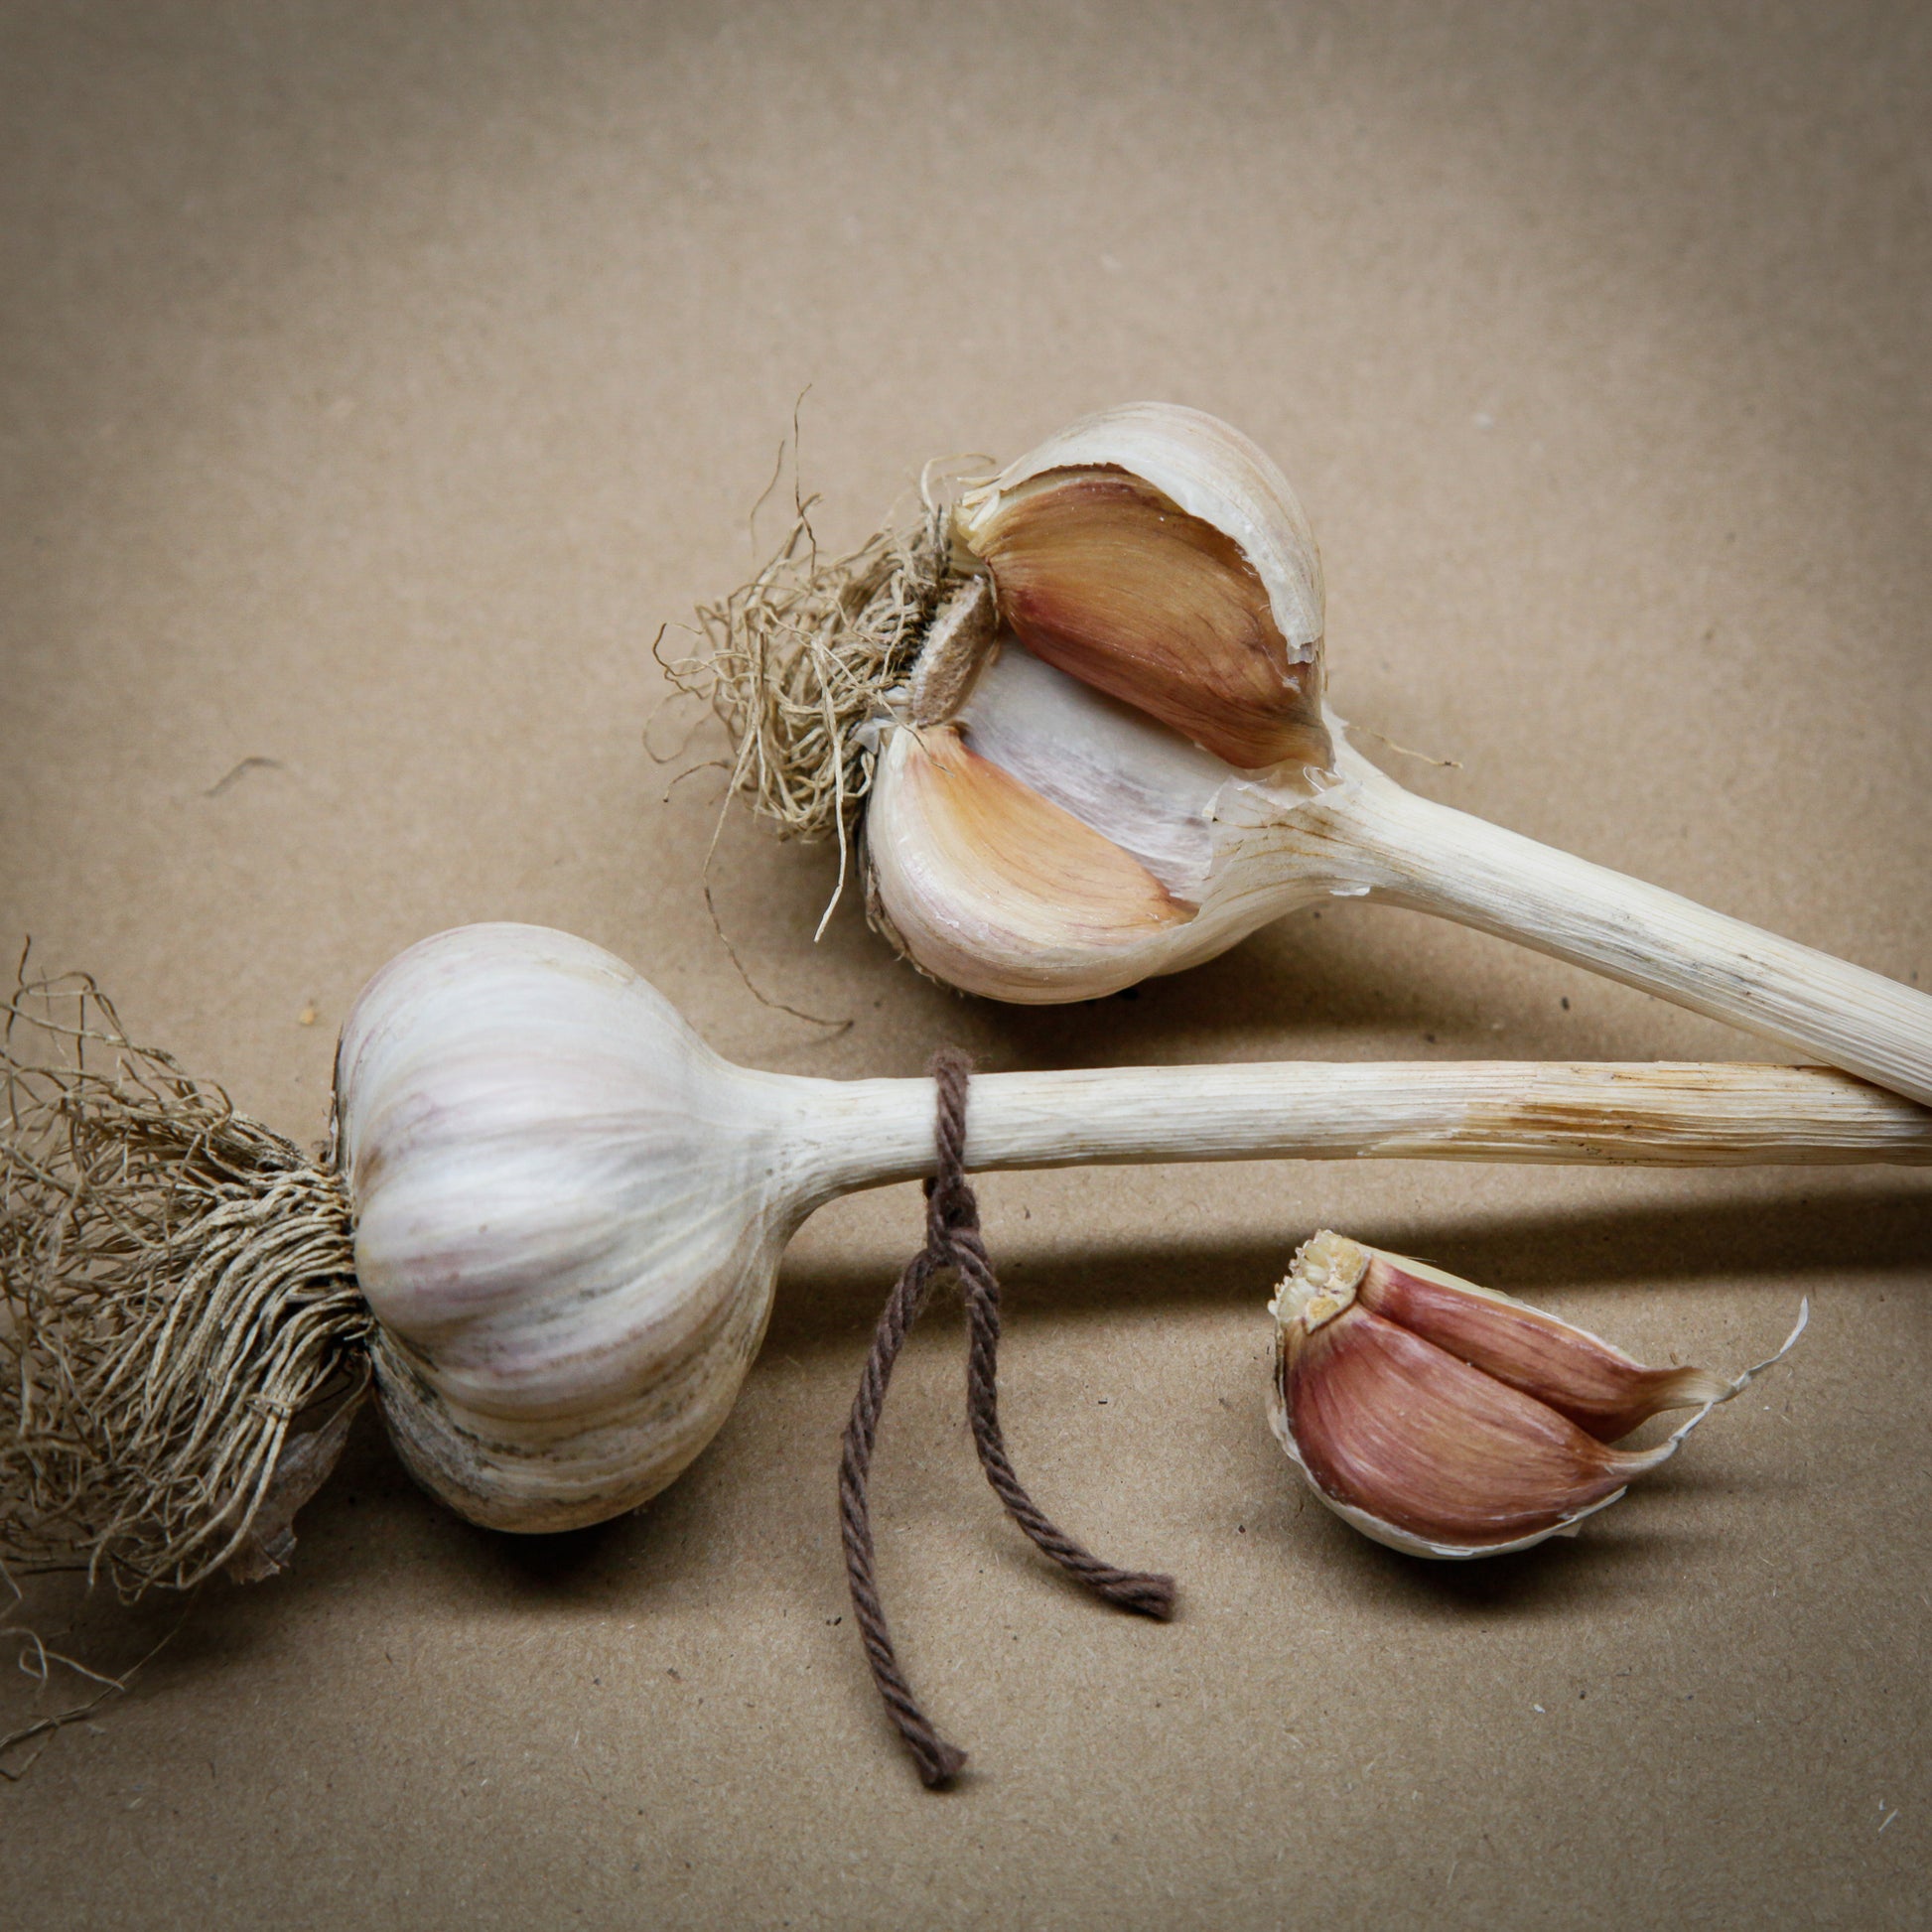 French Rocambole garlic with brown strings grown in Ontario by Garlicloves